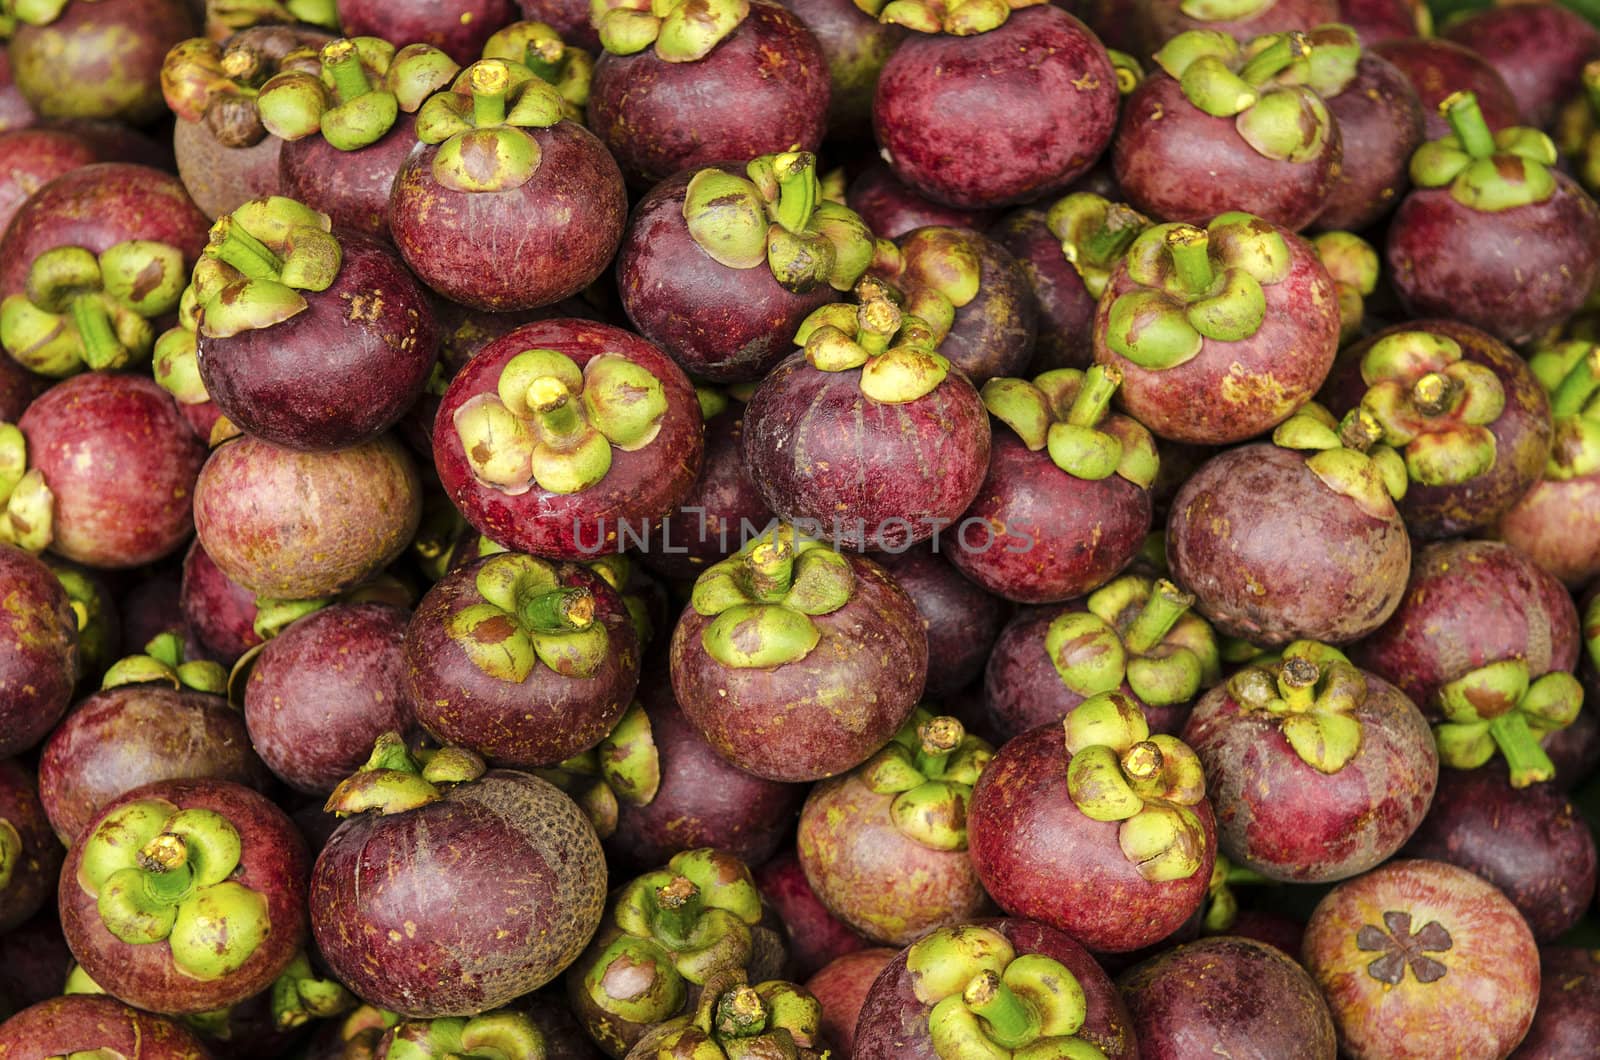 mangosteen tropical exotic fruit in market by jackmalipan